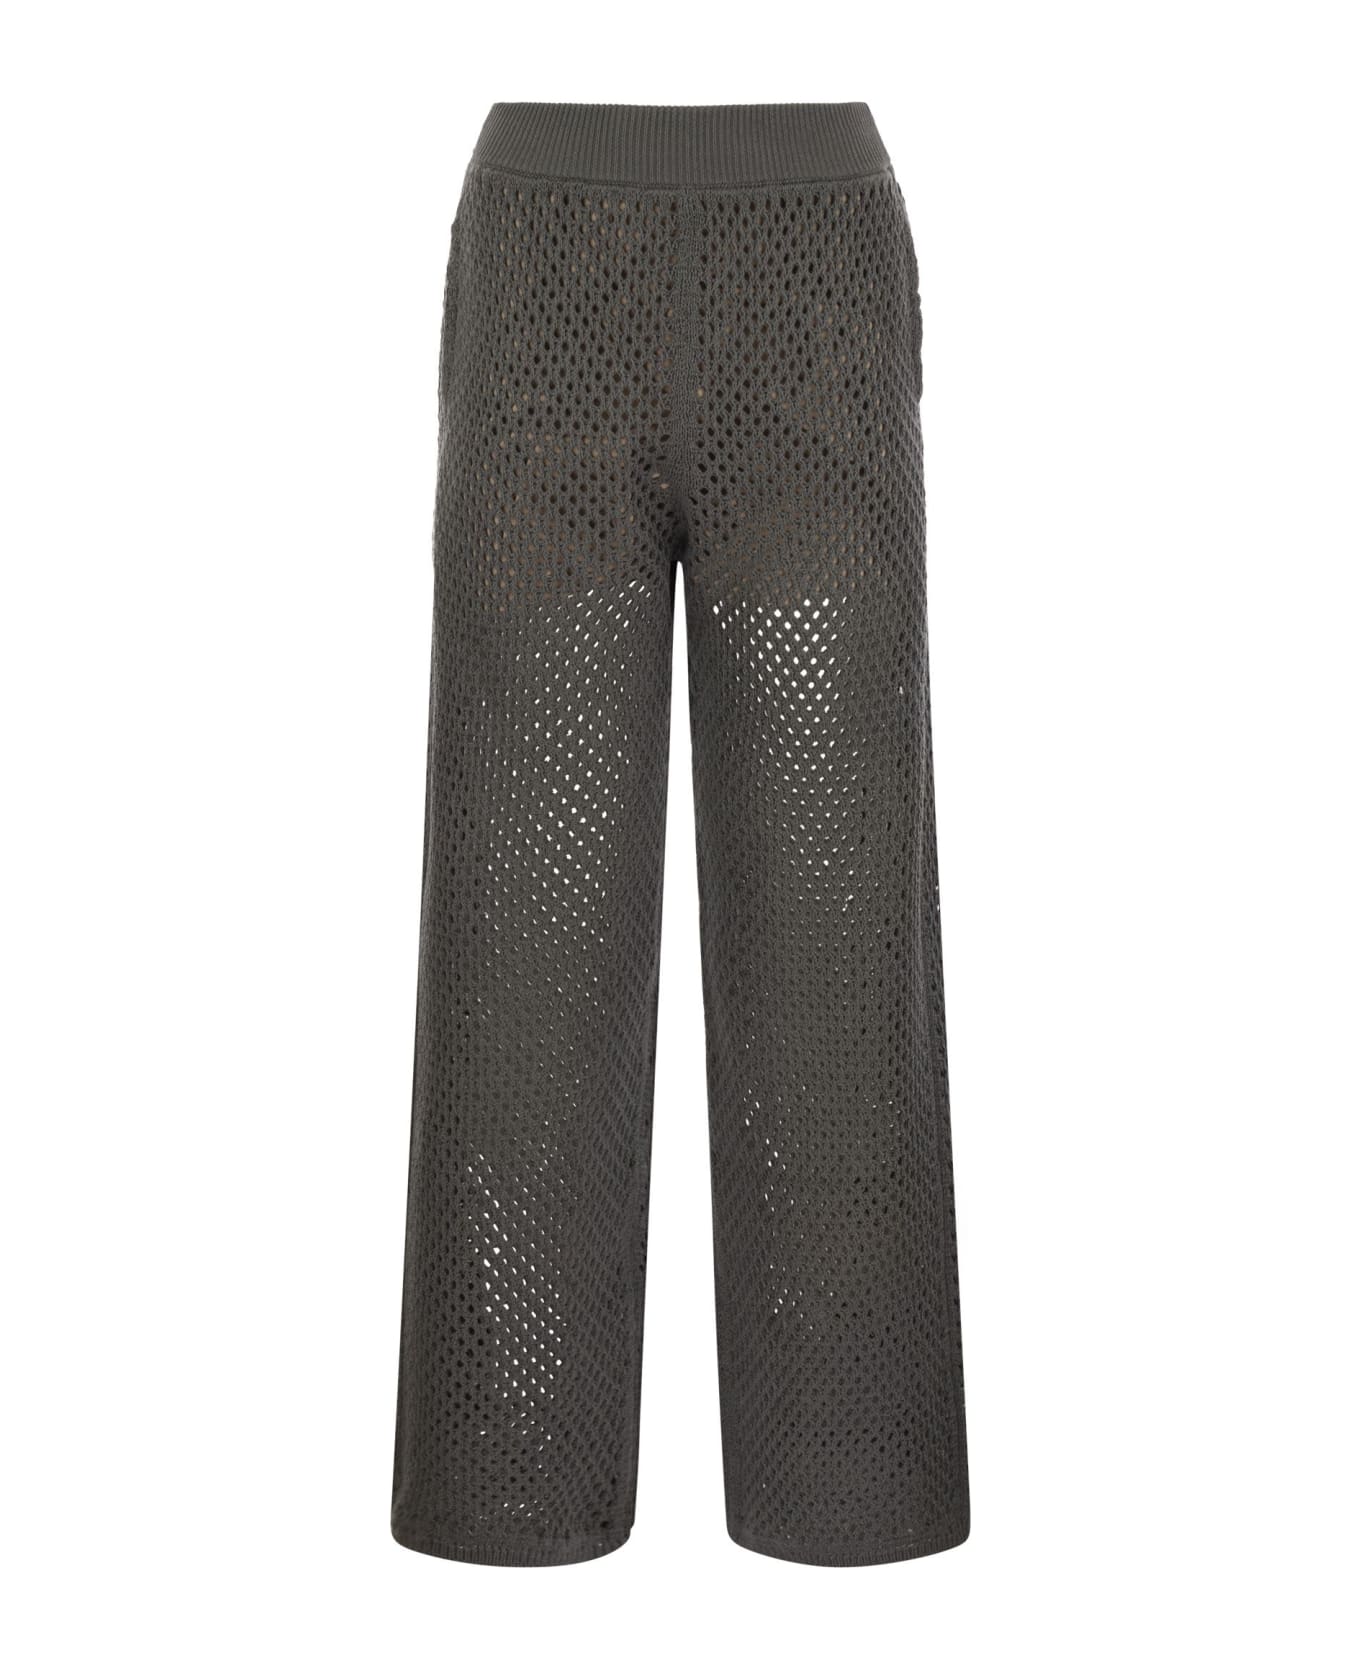 Brunello Cucinelli Net Knit Cotton Trousers - Anthracite ボトムス